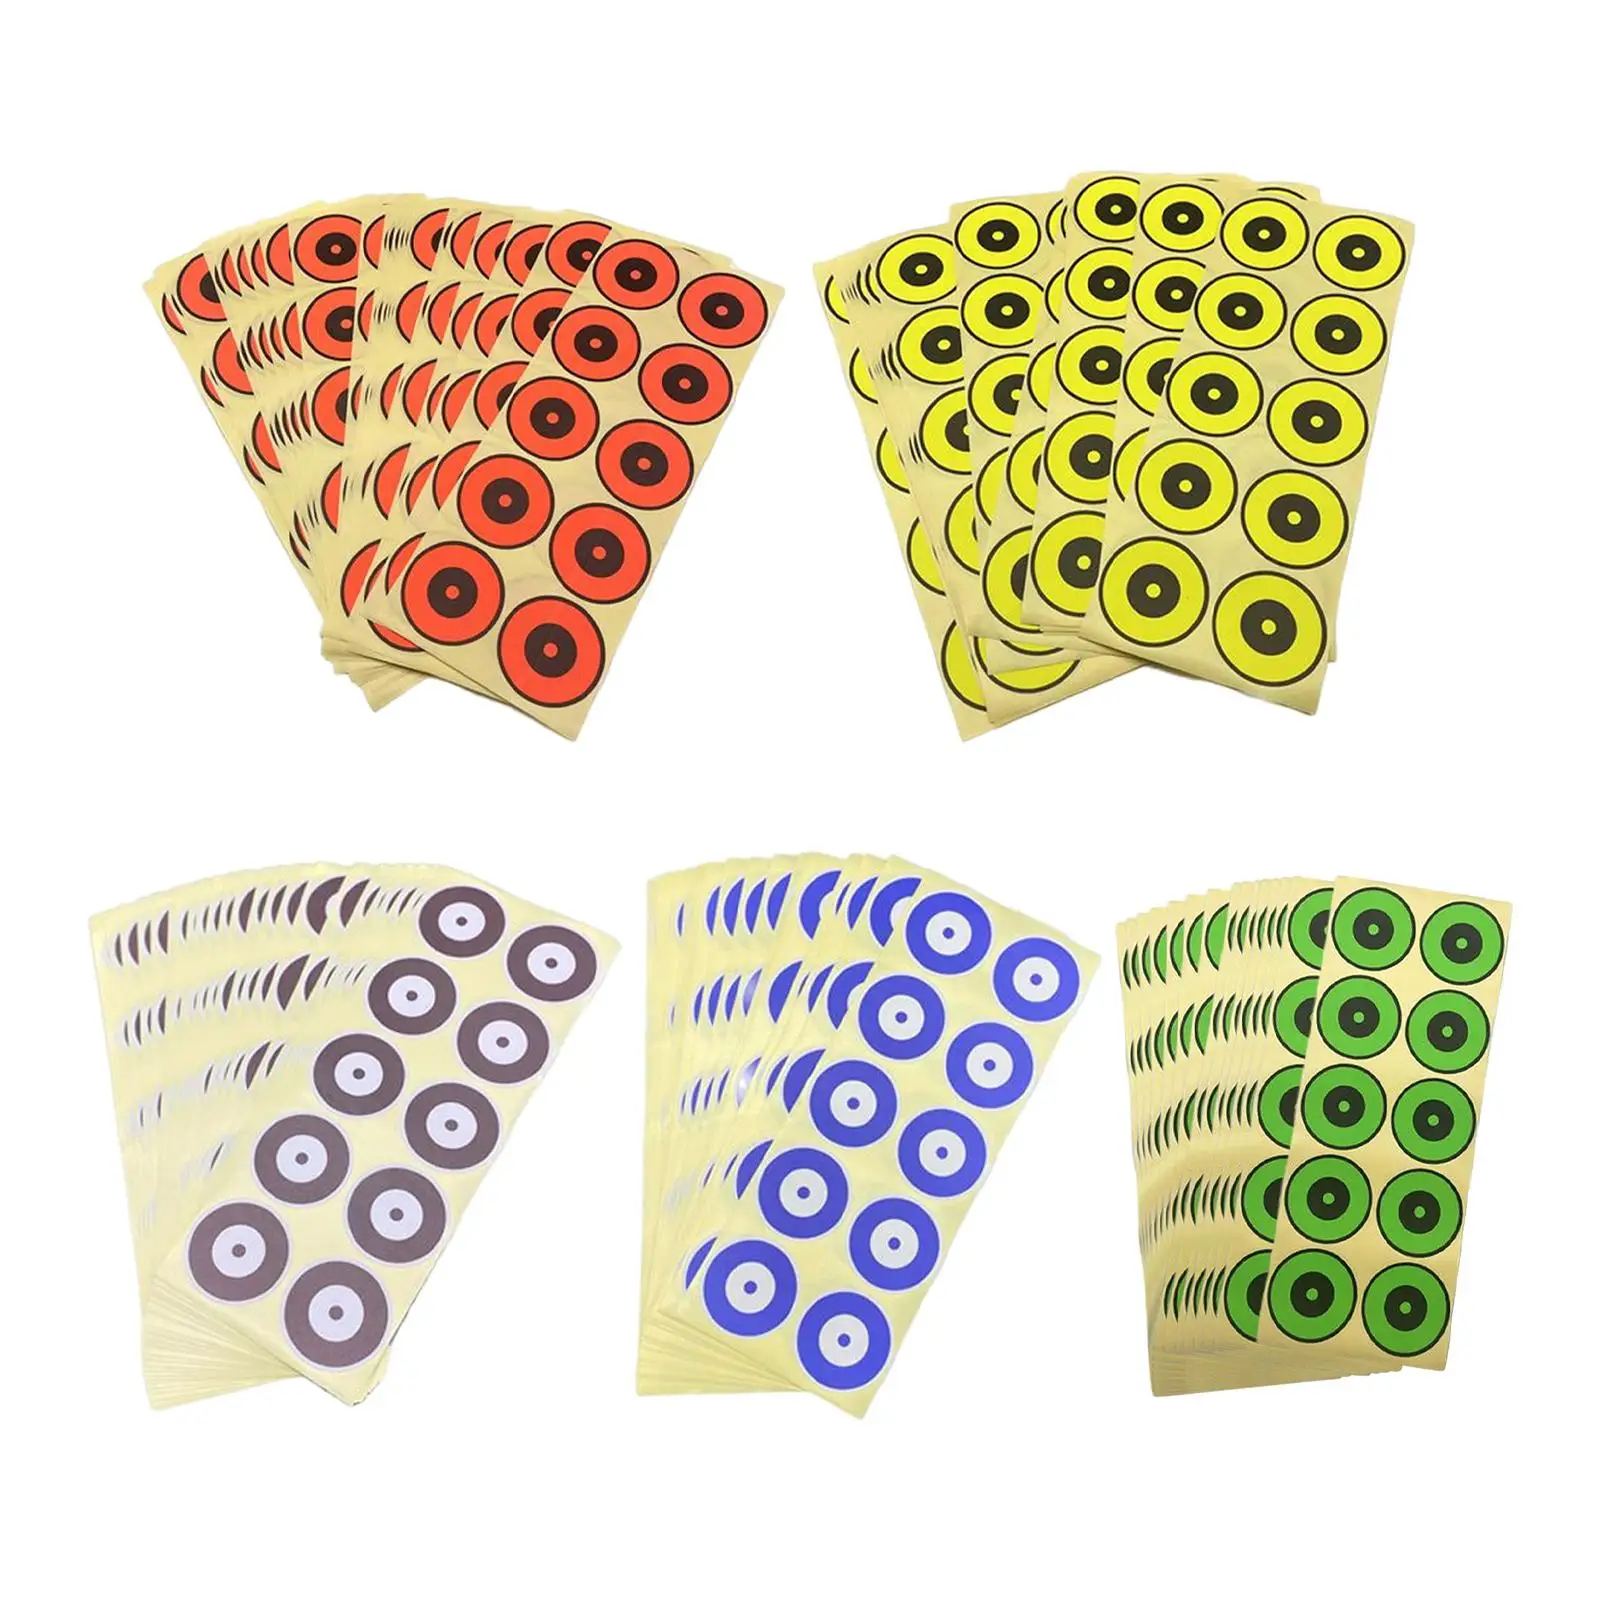 

250Pcs Splash Targets Stickers Reactive Paper Target Stickers Colorful High Visibility Splatter Shooting Targets for Bow Outdoor